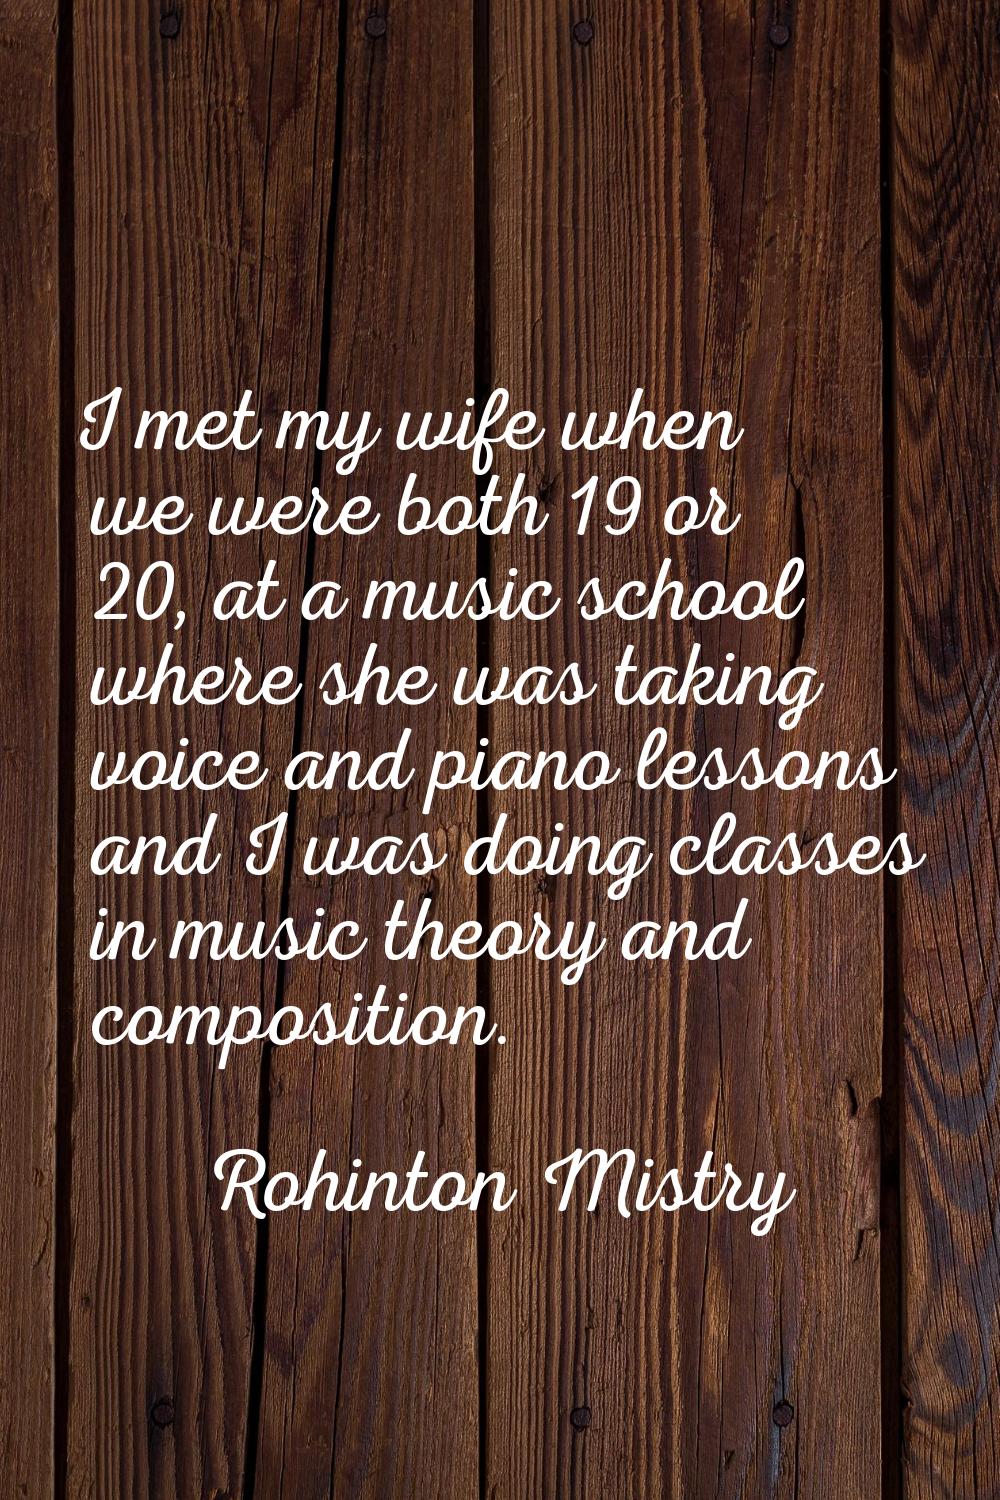 I met my wife when we were both 19 or 20, at a music school where she was taking voice and piano le